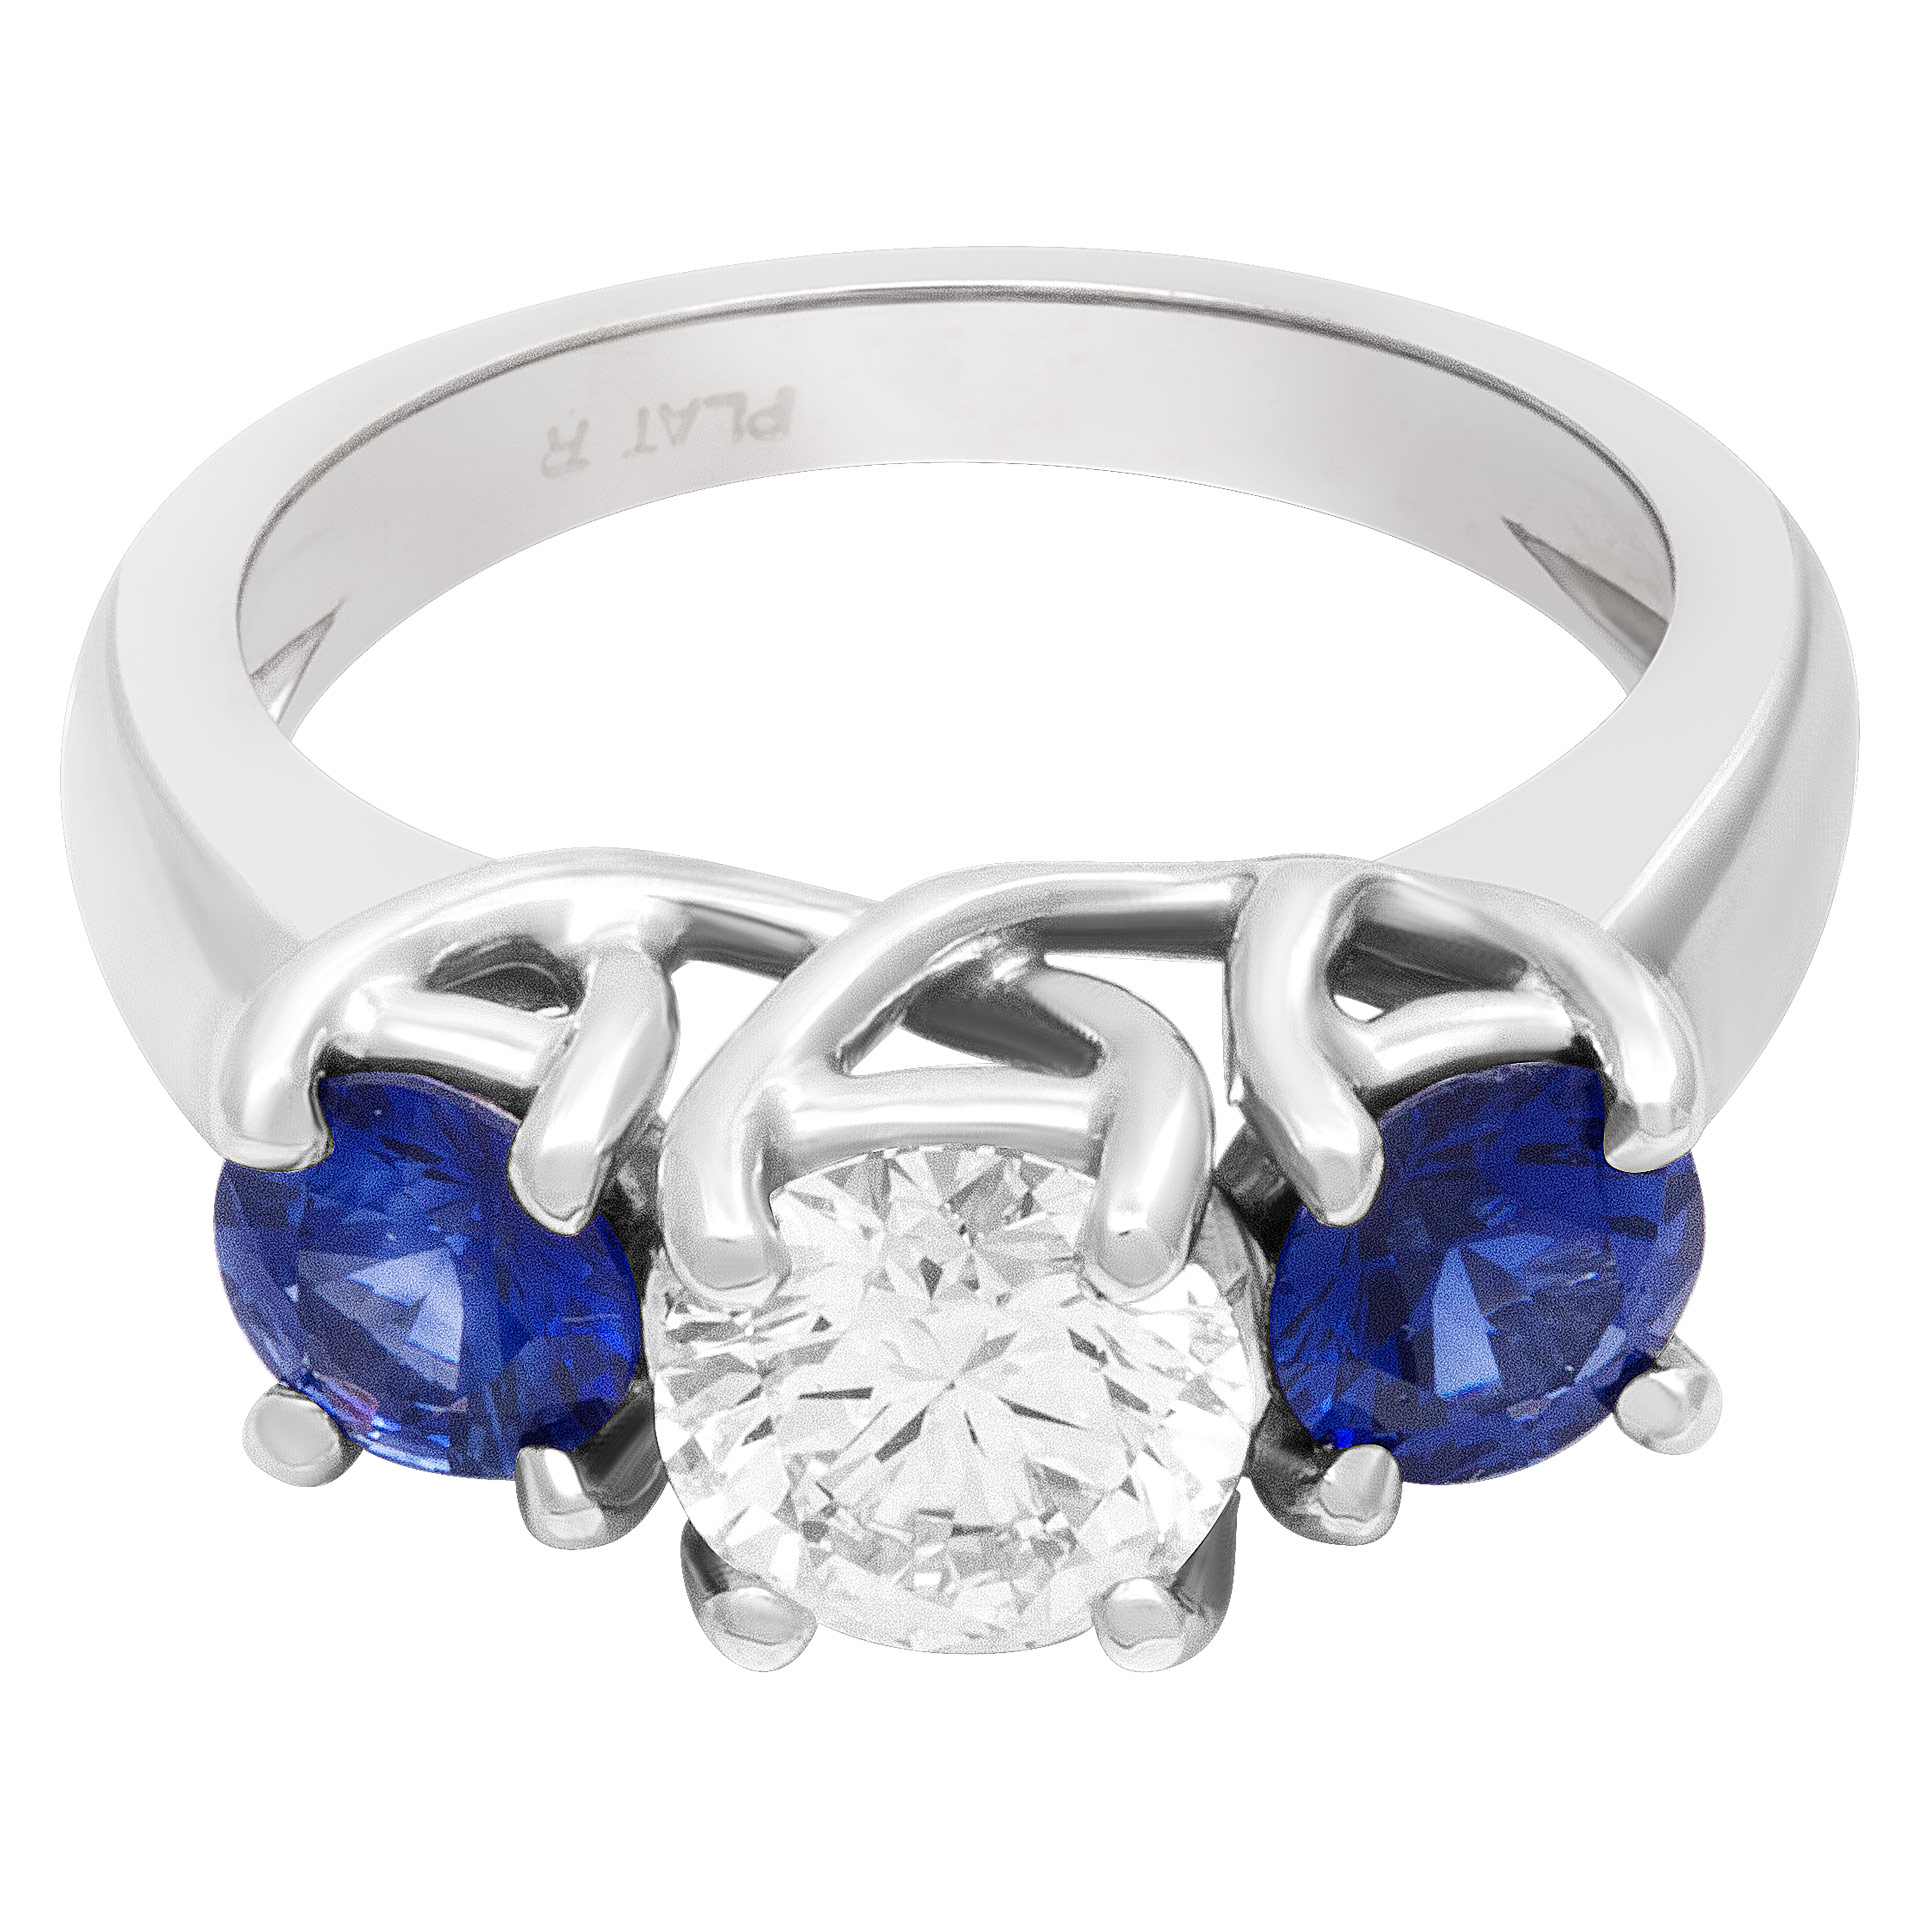 GIA certified round brilliant cut diamond 1.01 carat (H color, VS1 clarity) ring with 2 sapphires set in platinum. image 1